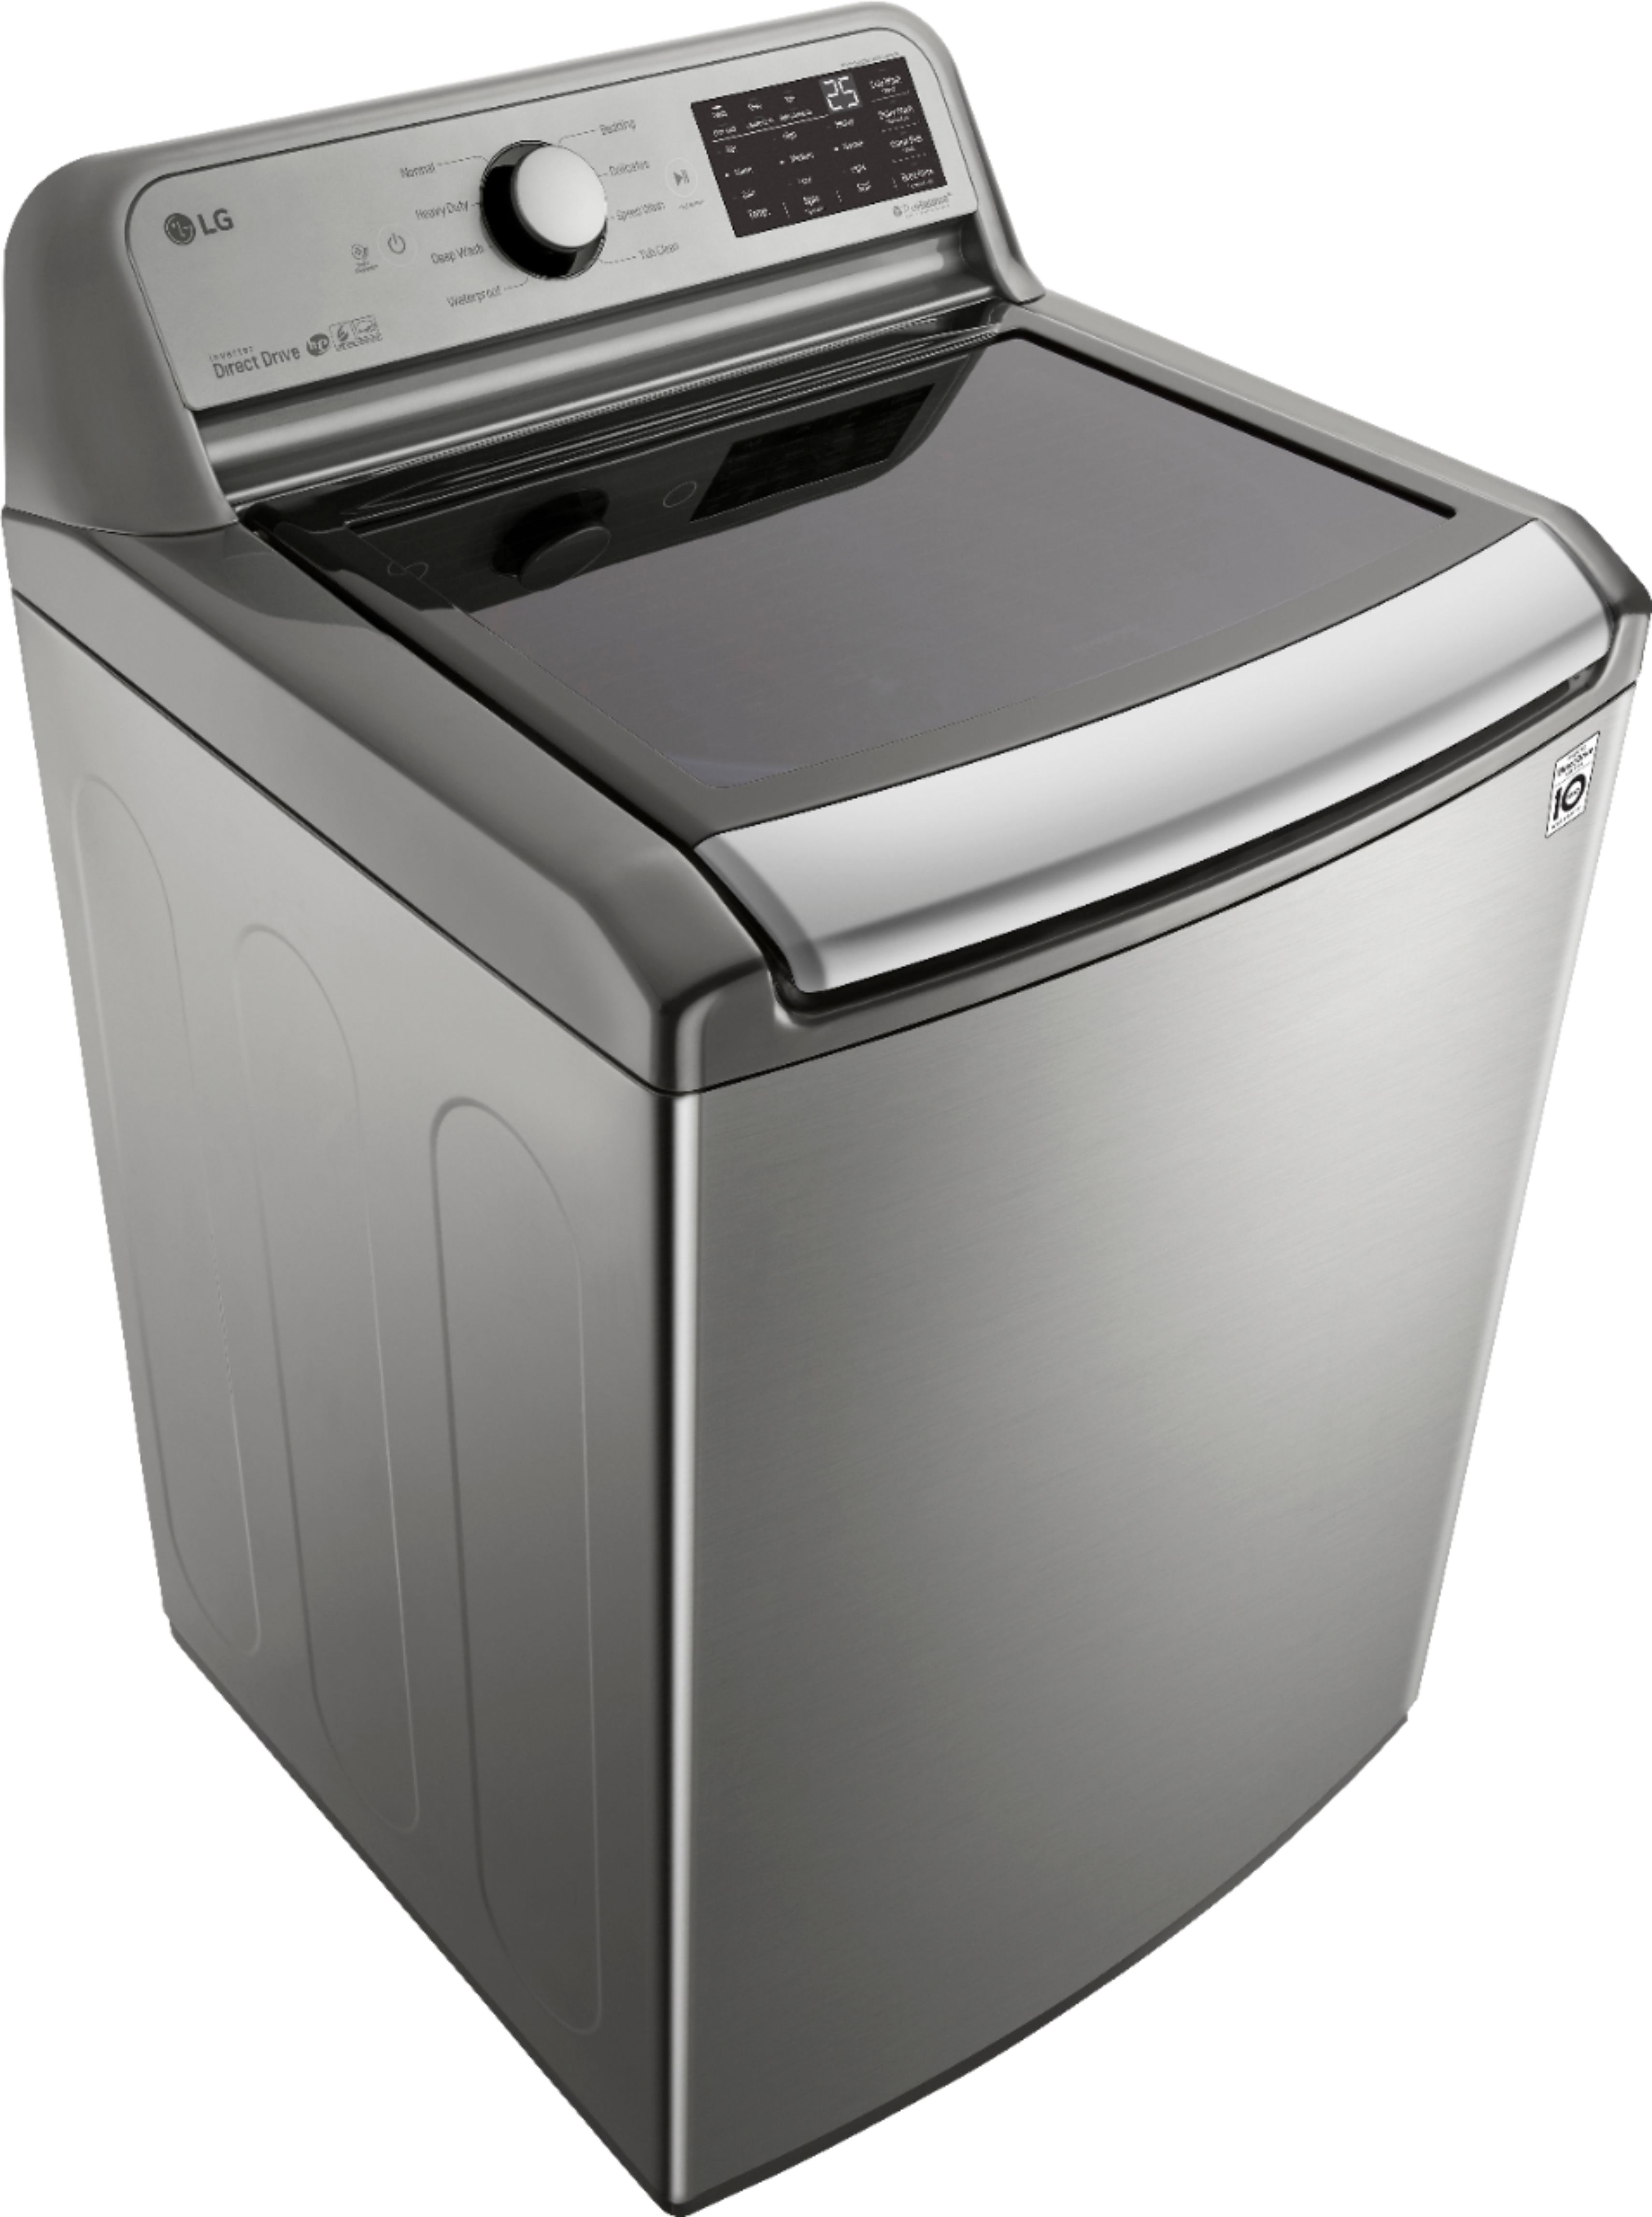 Lg 4 5 Cu Ft 8 Cycle High Efficiency Top Load Washer With 6motion Technology Graphite Steel Wt7060cv Best Buy